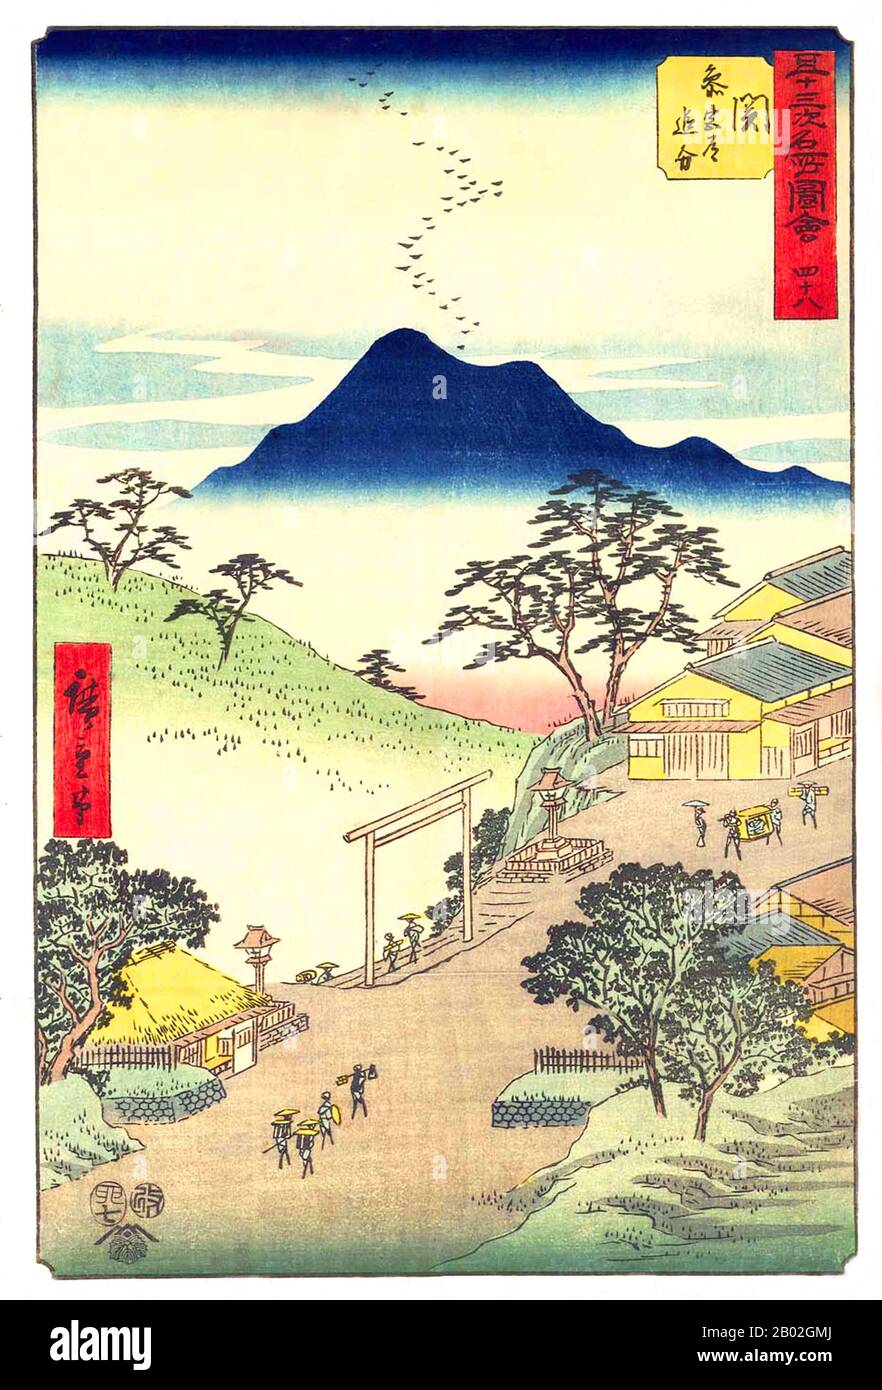 Utagawa Hiroshige (歌川 広重, 1797 – October 12, 1858) was a Japanese ukiyo-e artist, and one of the last great artists in that tradition. He was also referred to as Andō Hiroshige (安藤 広重) (an irregular combination of family name and art name) and by the art name of Ichiyūsai Hiroshige (一幽斎廣重).  The Tōkaidō (東海道 East Sea Road) was the most important of the Five Routes of the Edo period, connecting Edo (modern-day Tokyo) to Kyoto in Japan. Unlike the inland and less heavily travelled Nakasendō, the Tōkaidō travelled along the sea coast of eastern Honshū, hence the route's name. Stock Photo